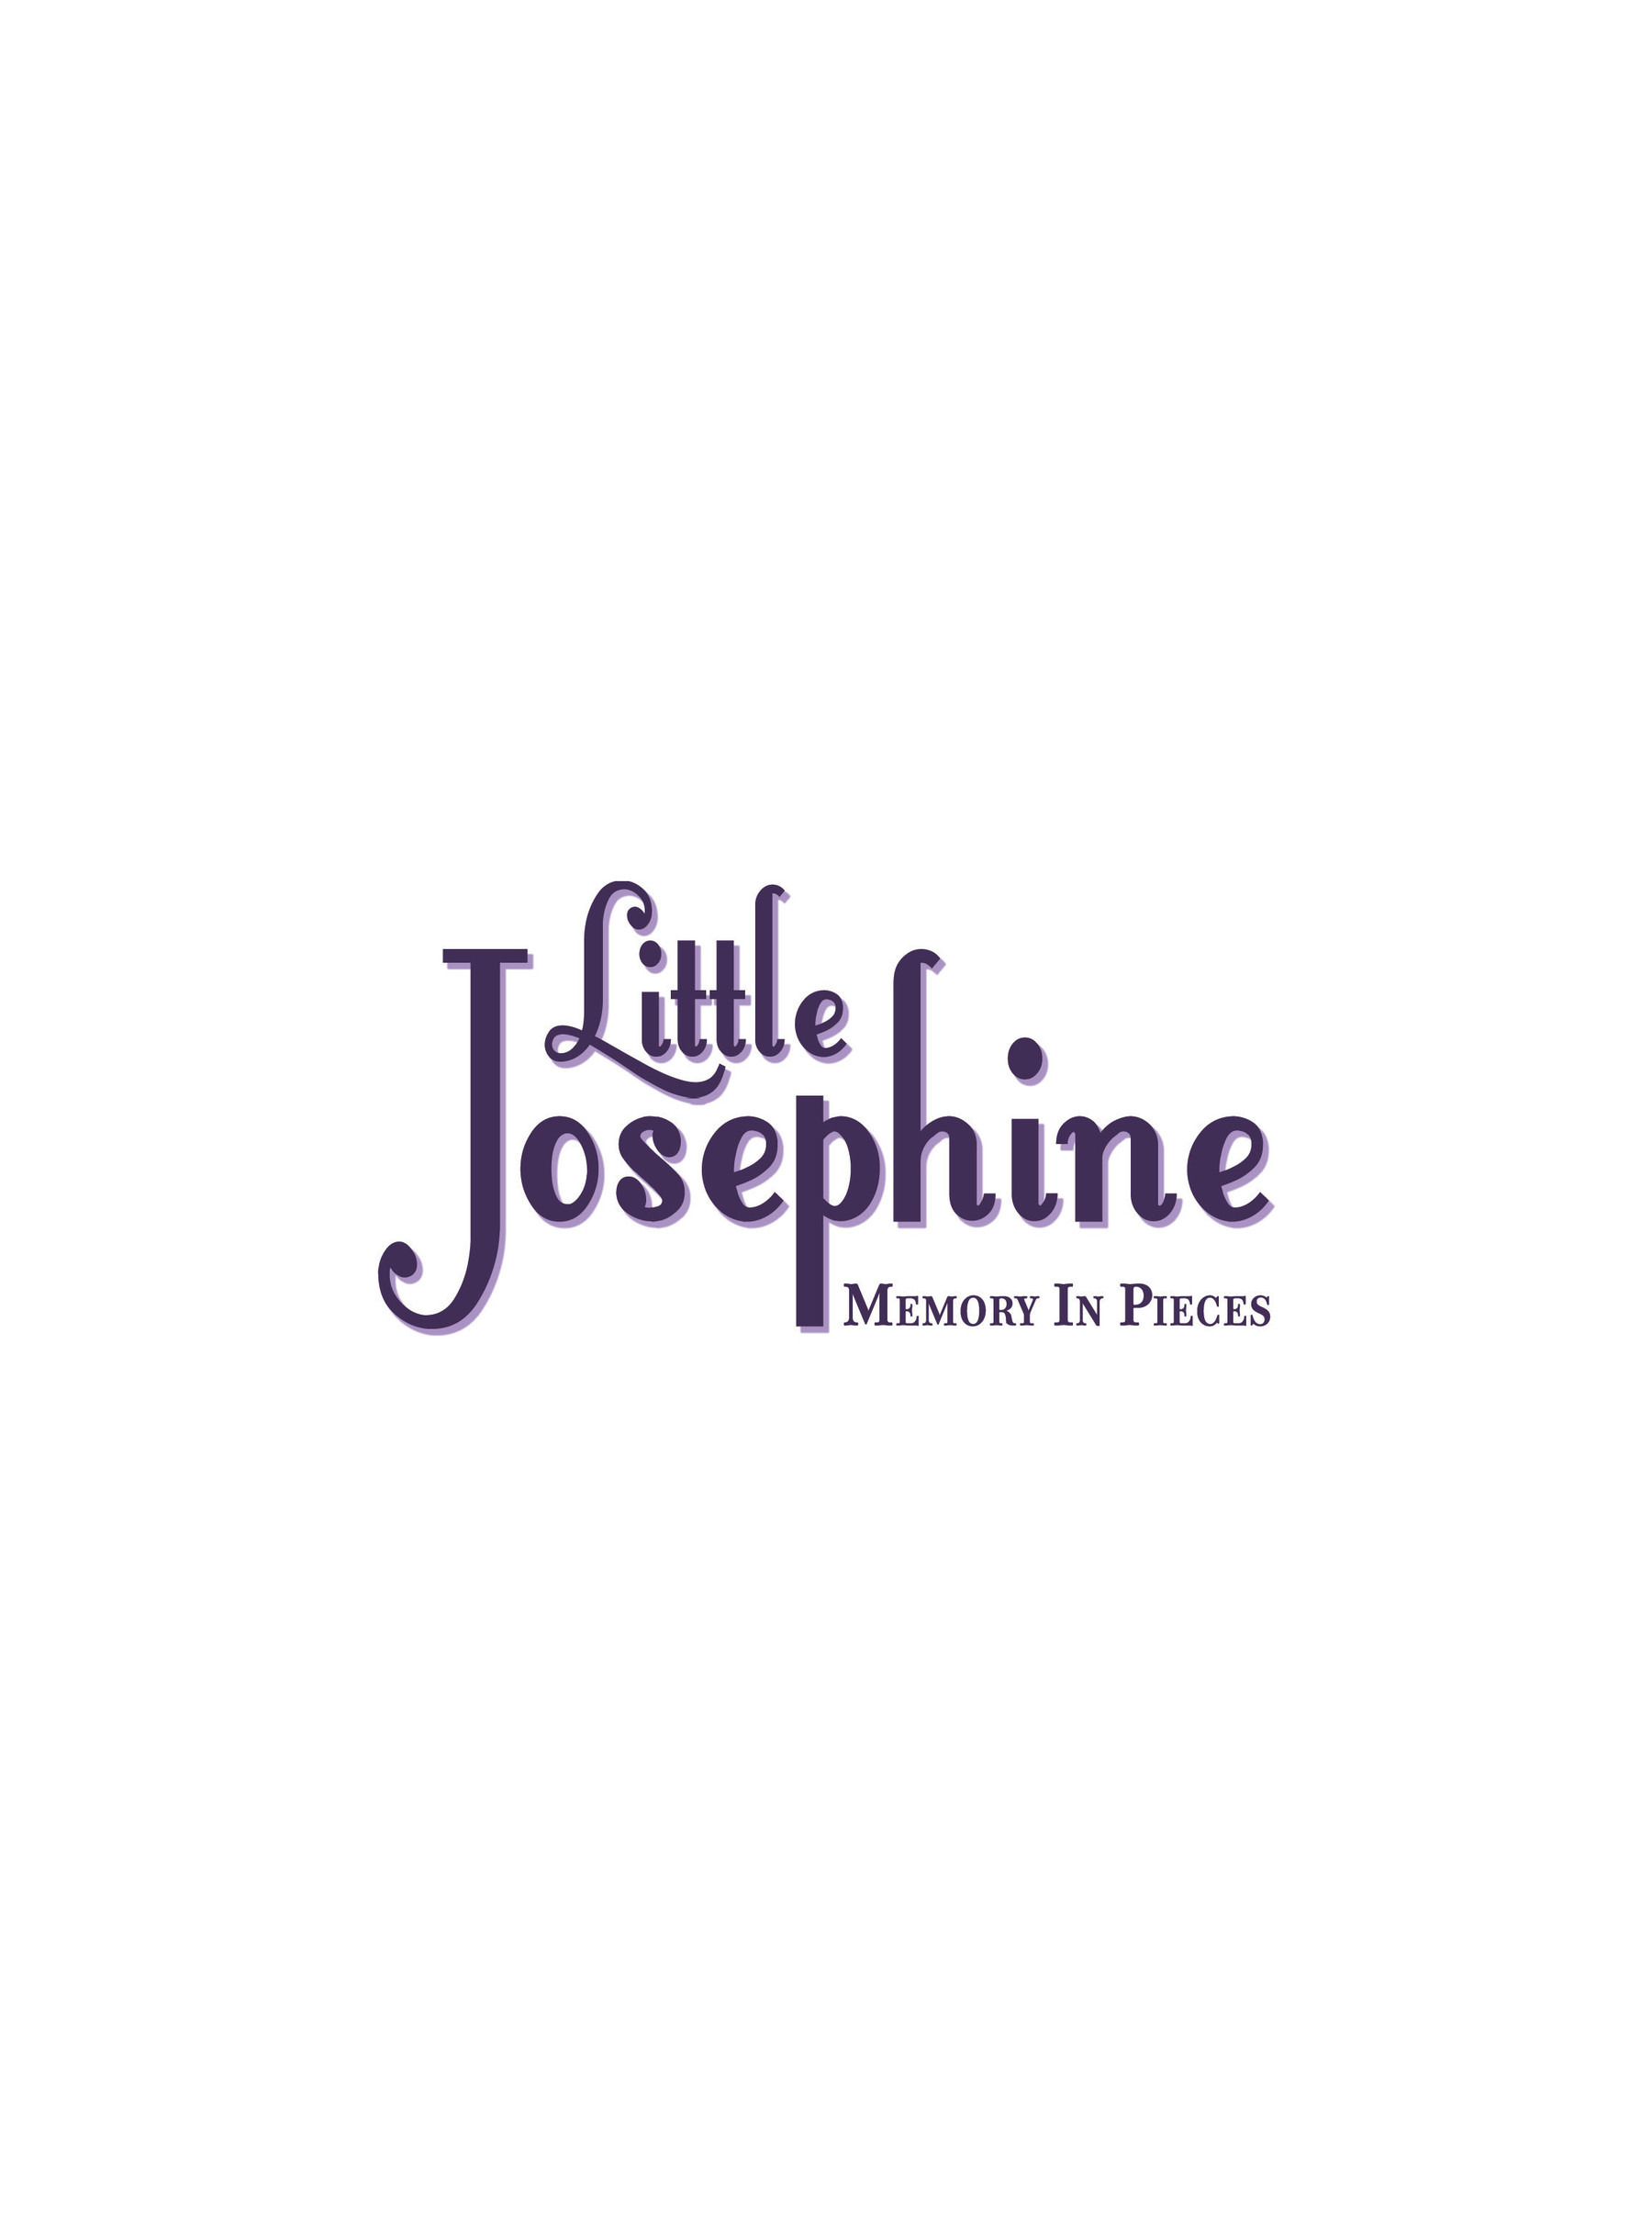 Read online Little Josephine: Memory in Pieces comic -  Issue # TPB - 2